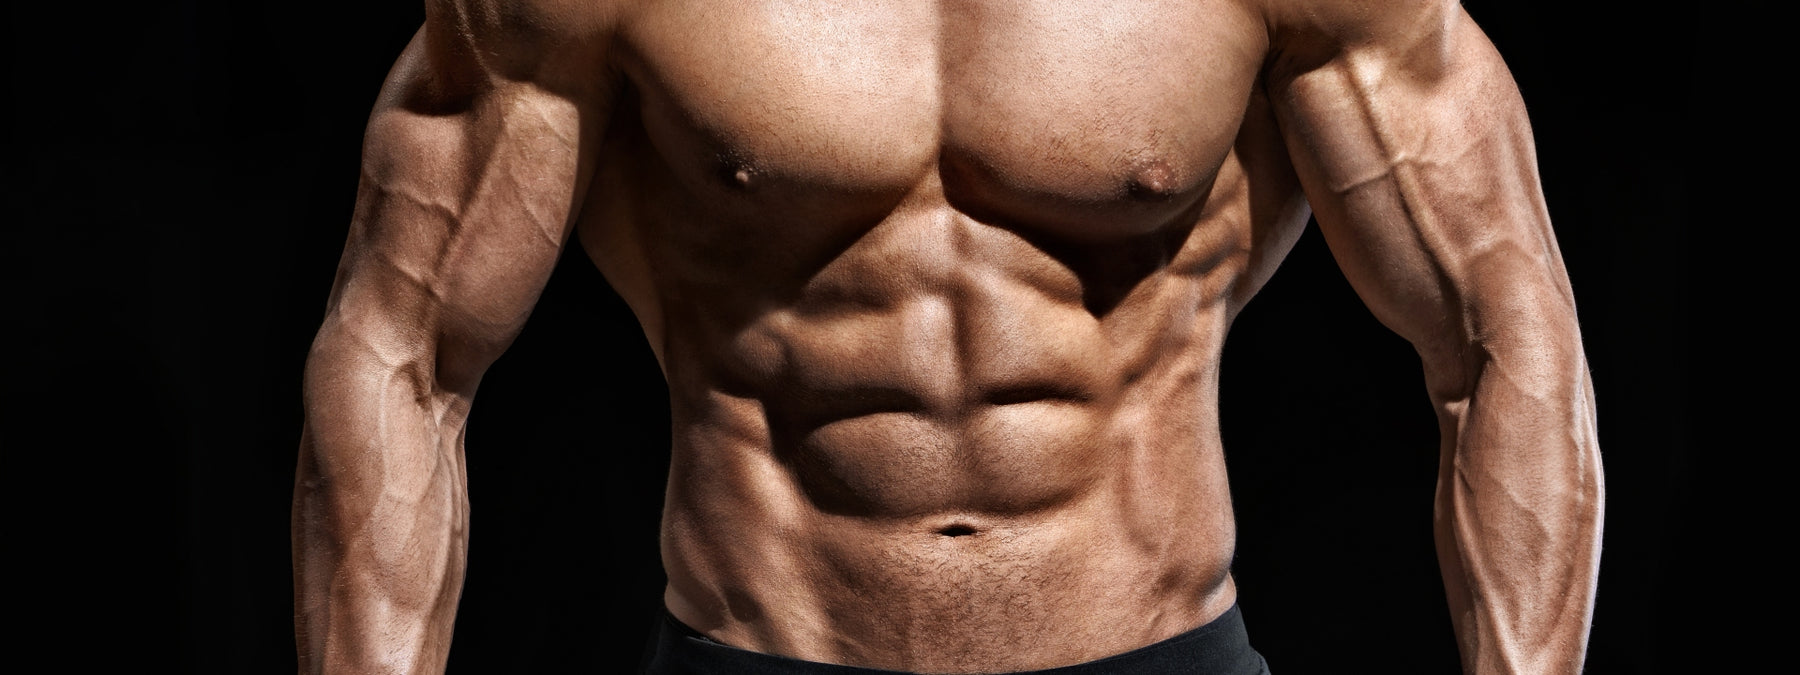 How to Get a Six Pack - 5 Things You Must Know